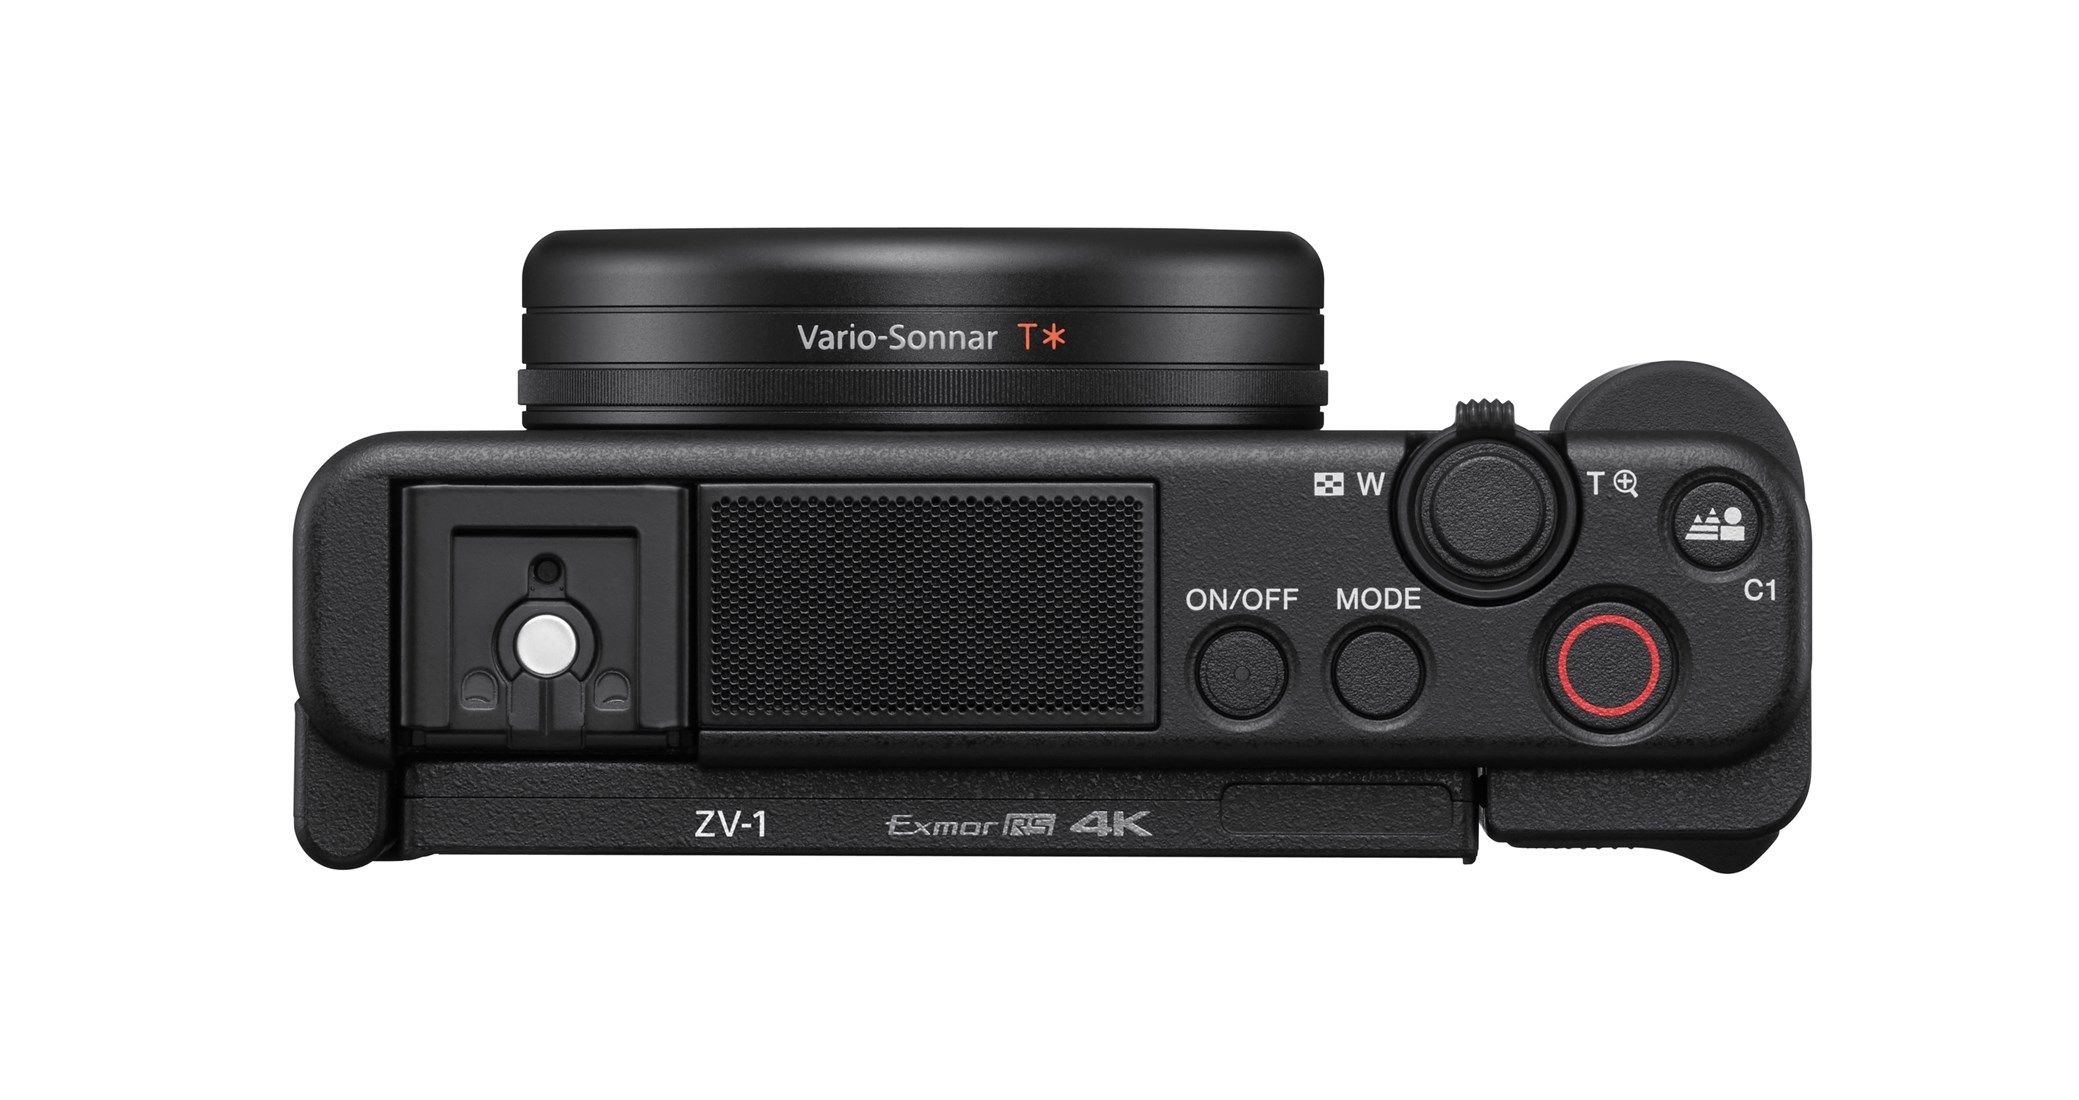 Sony ZV-1 Compact Digital Camera 4K UHD - Black - Perfect for Vloggers - Product Photo 6 - Top down view of the camera with microphone and controls visible